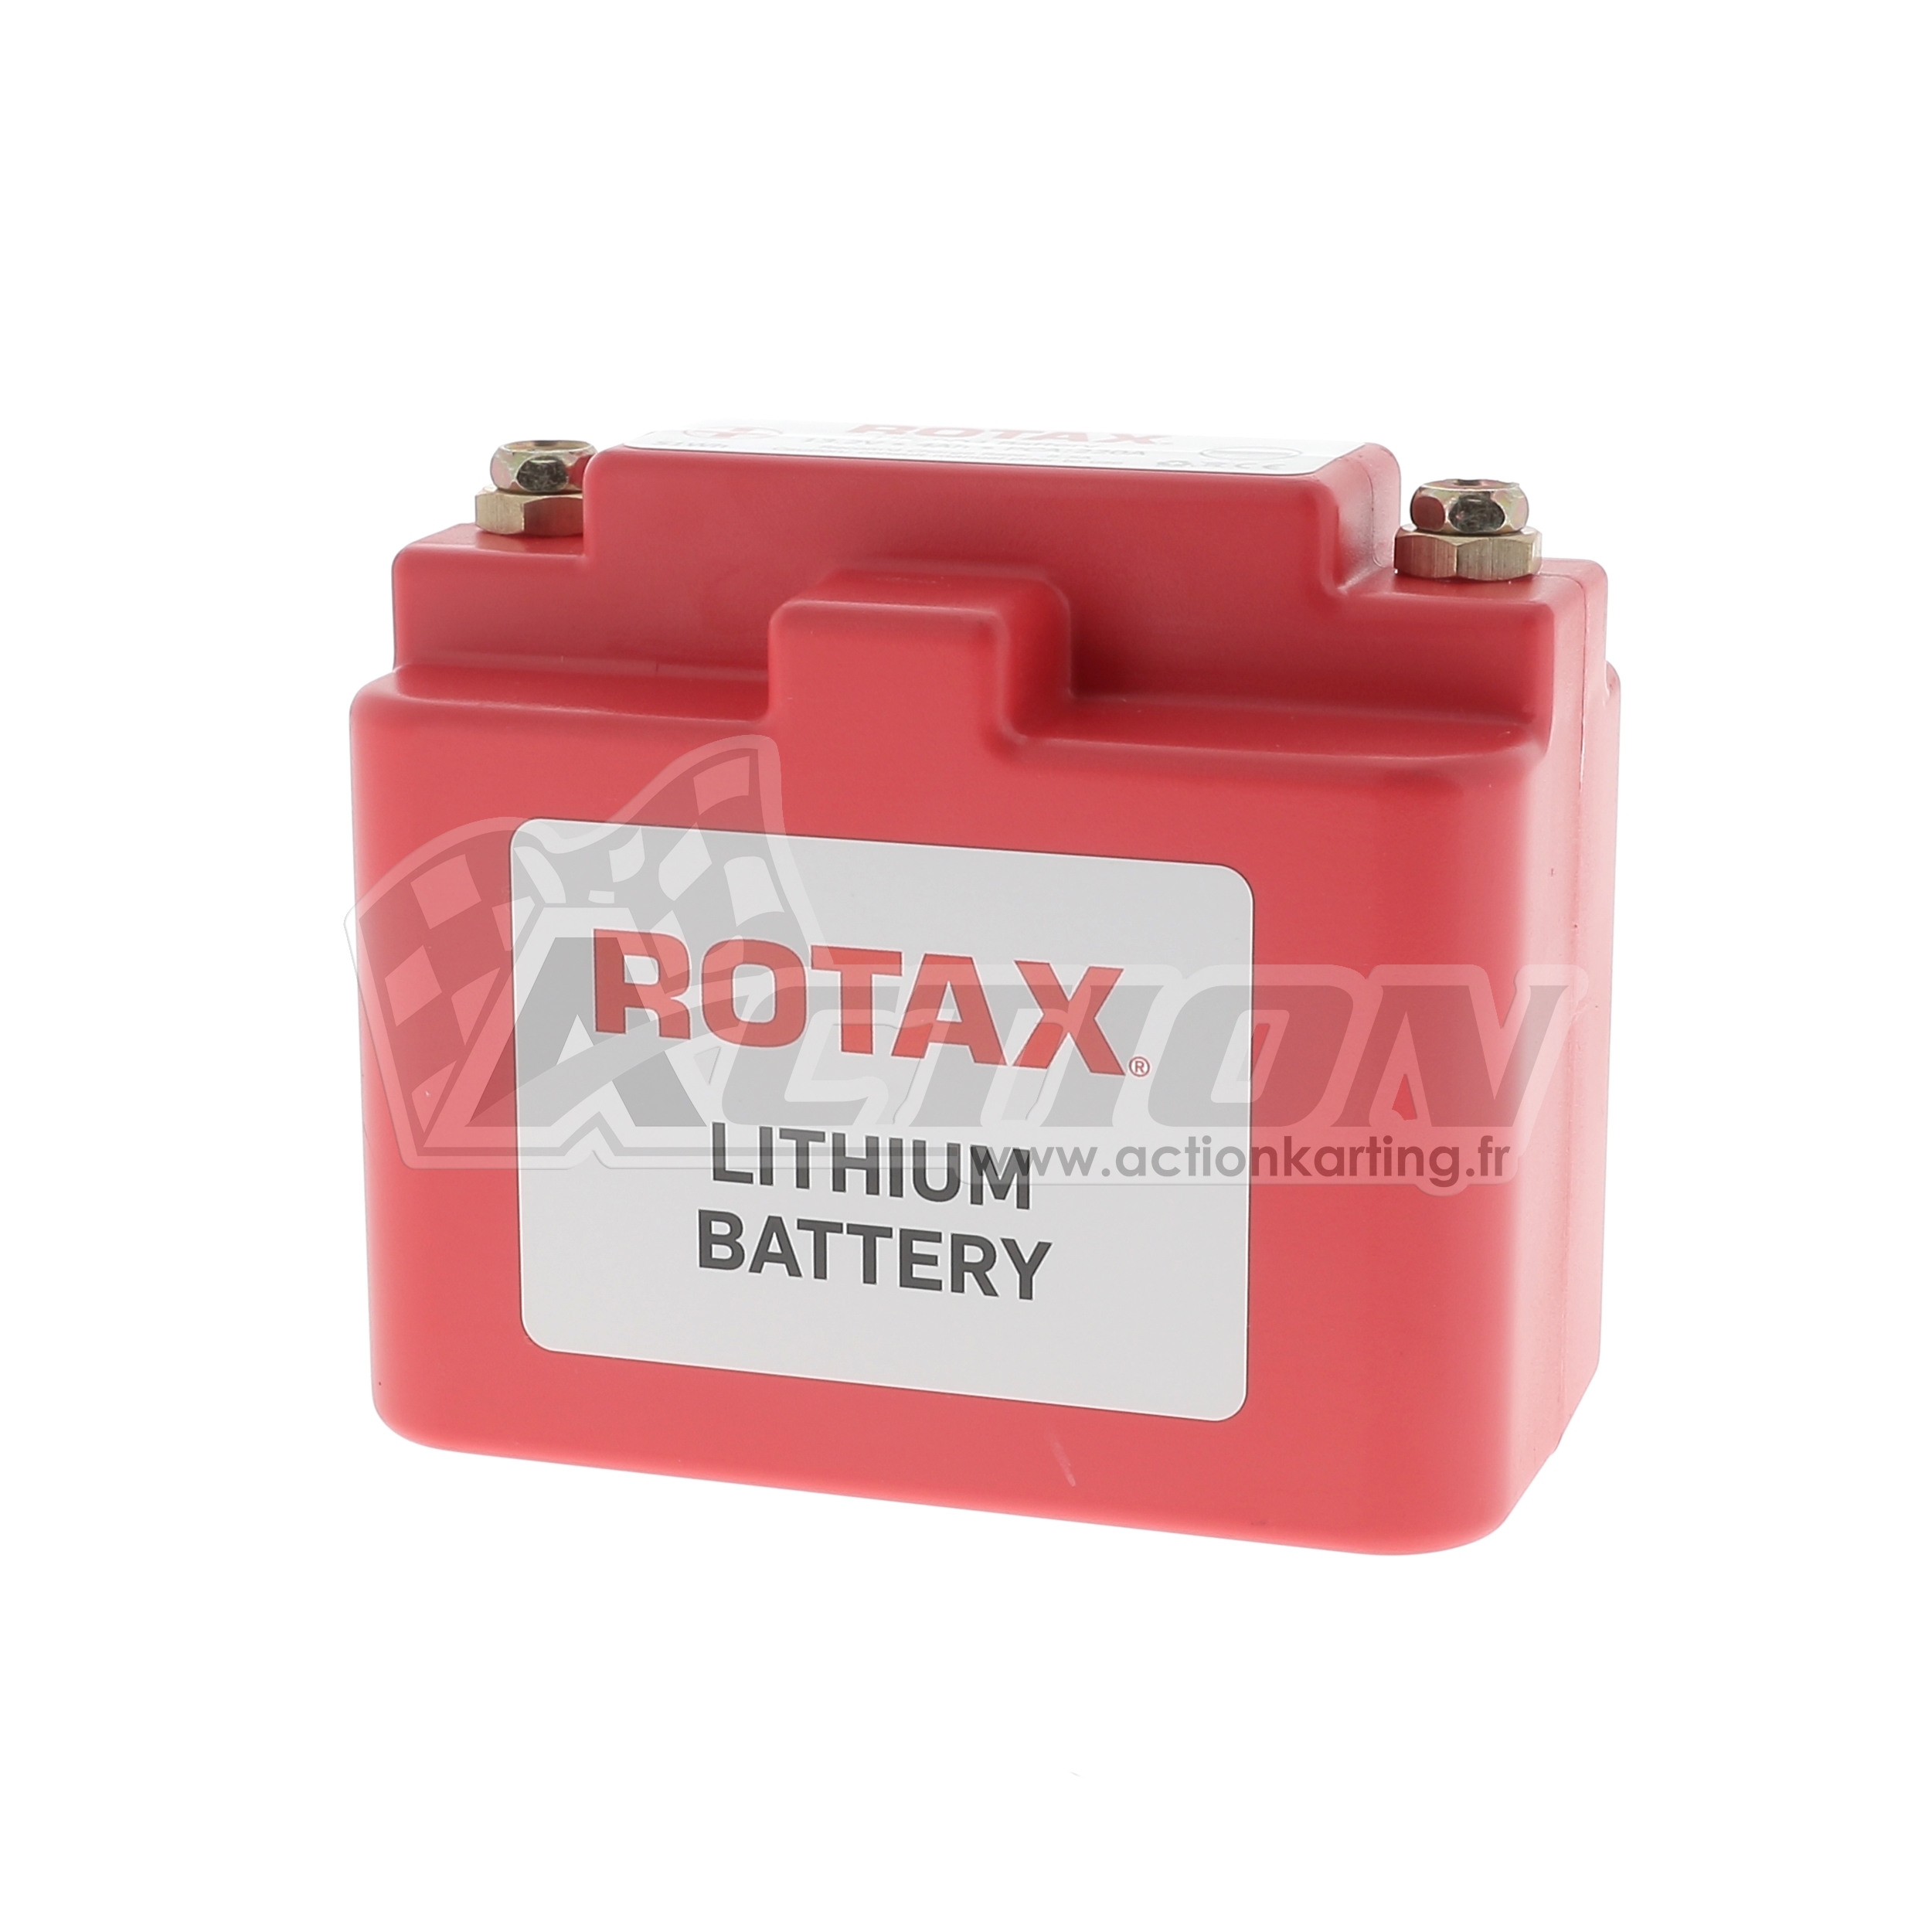 Batterie 12 volts ROTAX (LiFePo4) 4/Ah 0,6 kg - Action karting ...